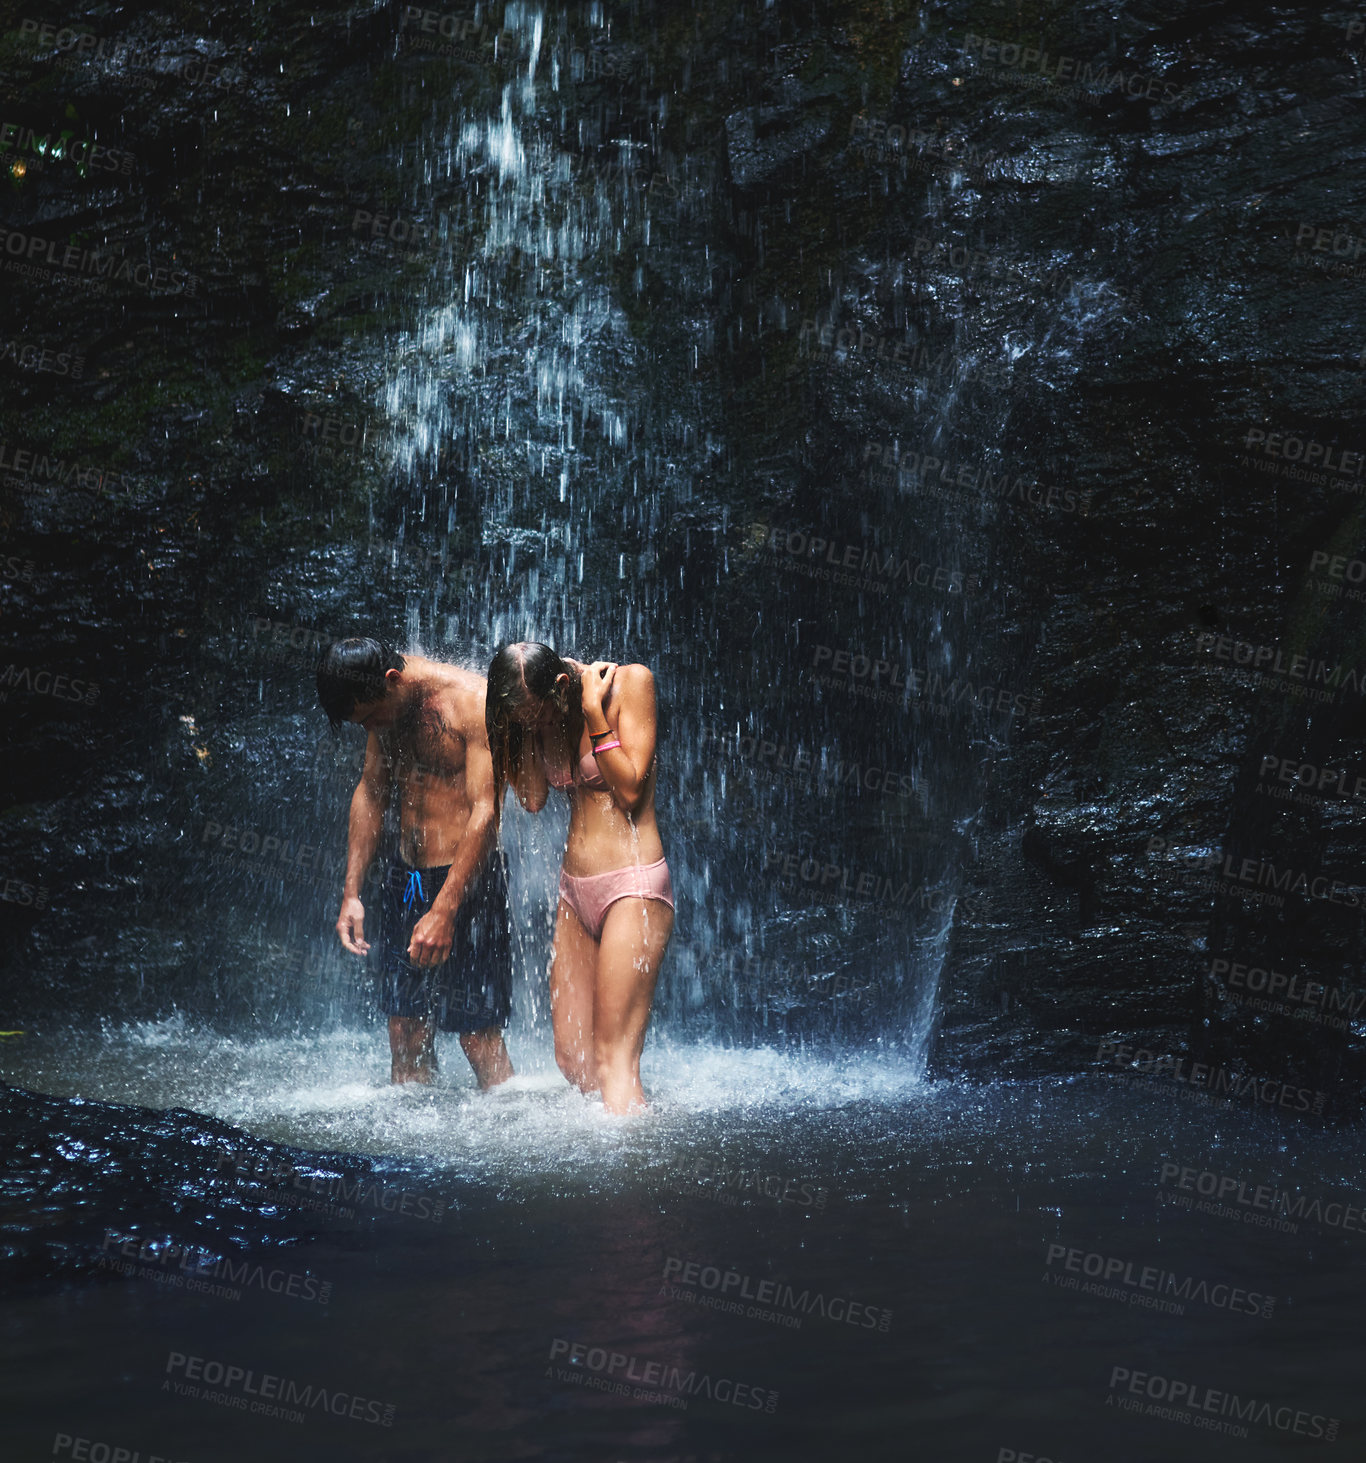 Buy stock photo Shot of two young people standing under a waterfall and enjoying every moment of it while looking down